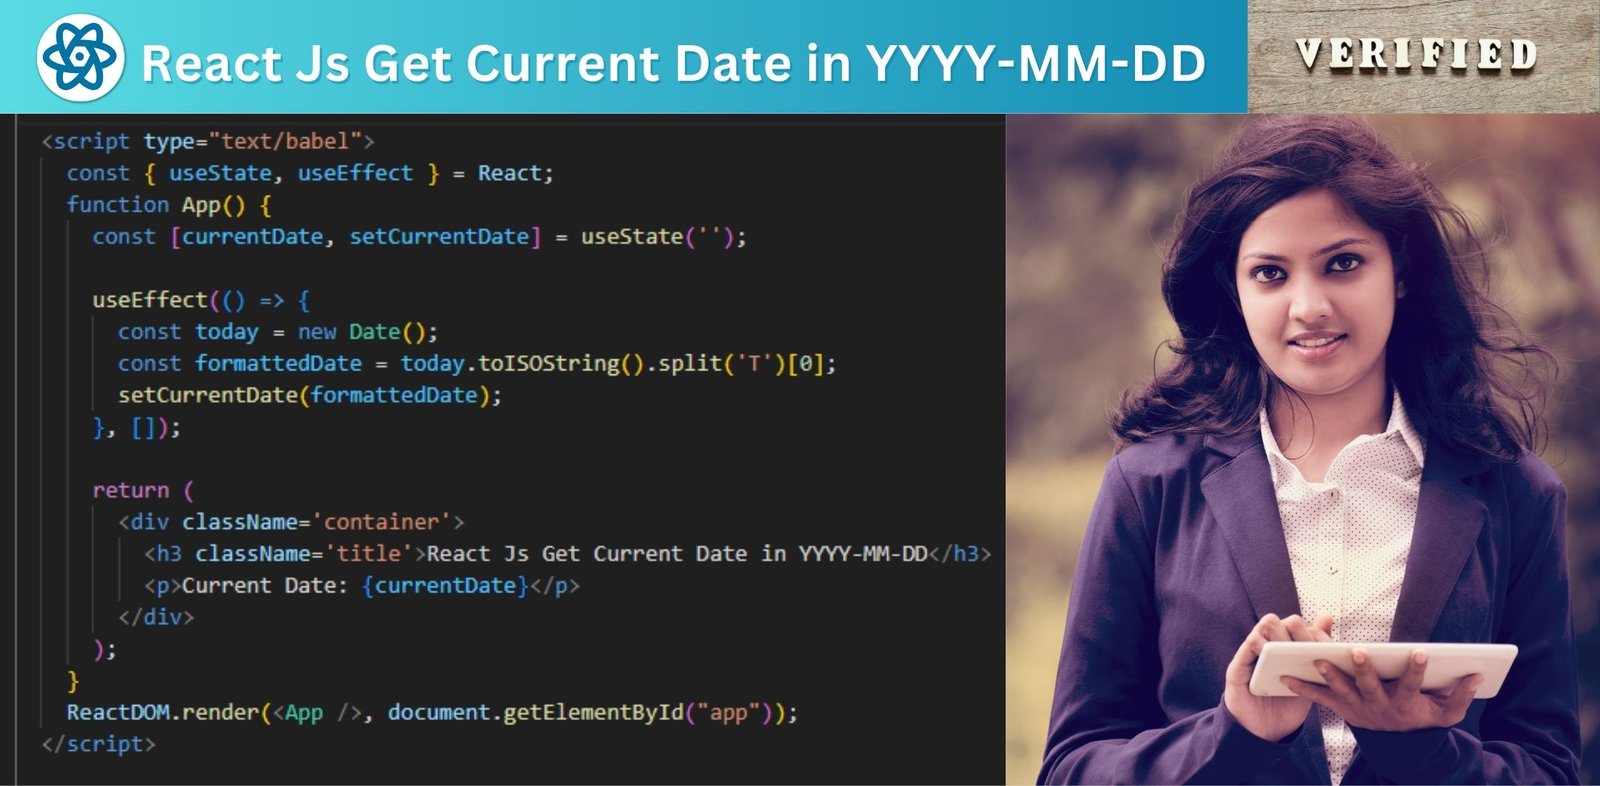 React Js Get Current Date in YYYY-MM-DD